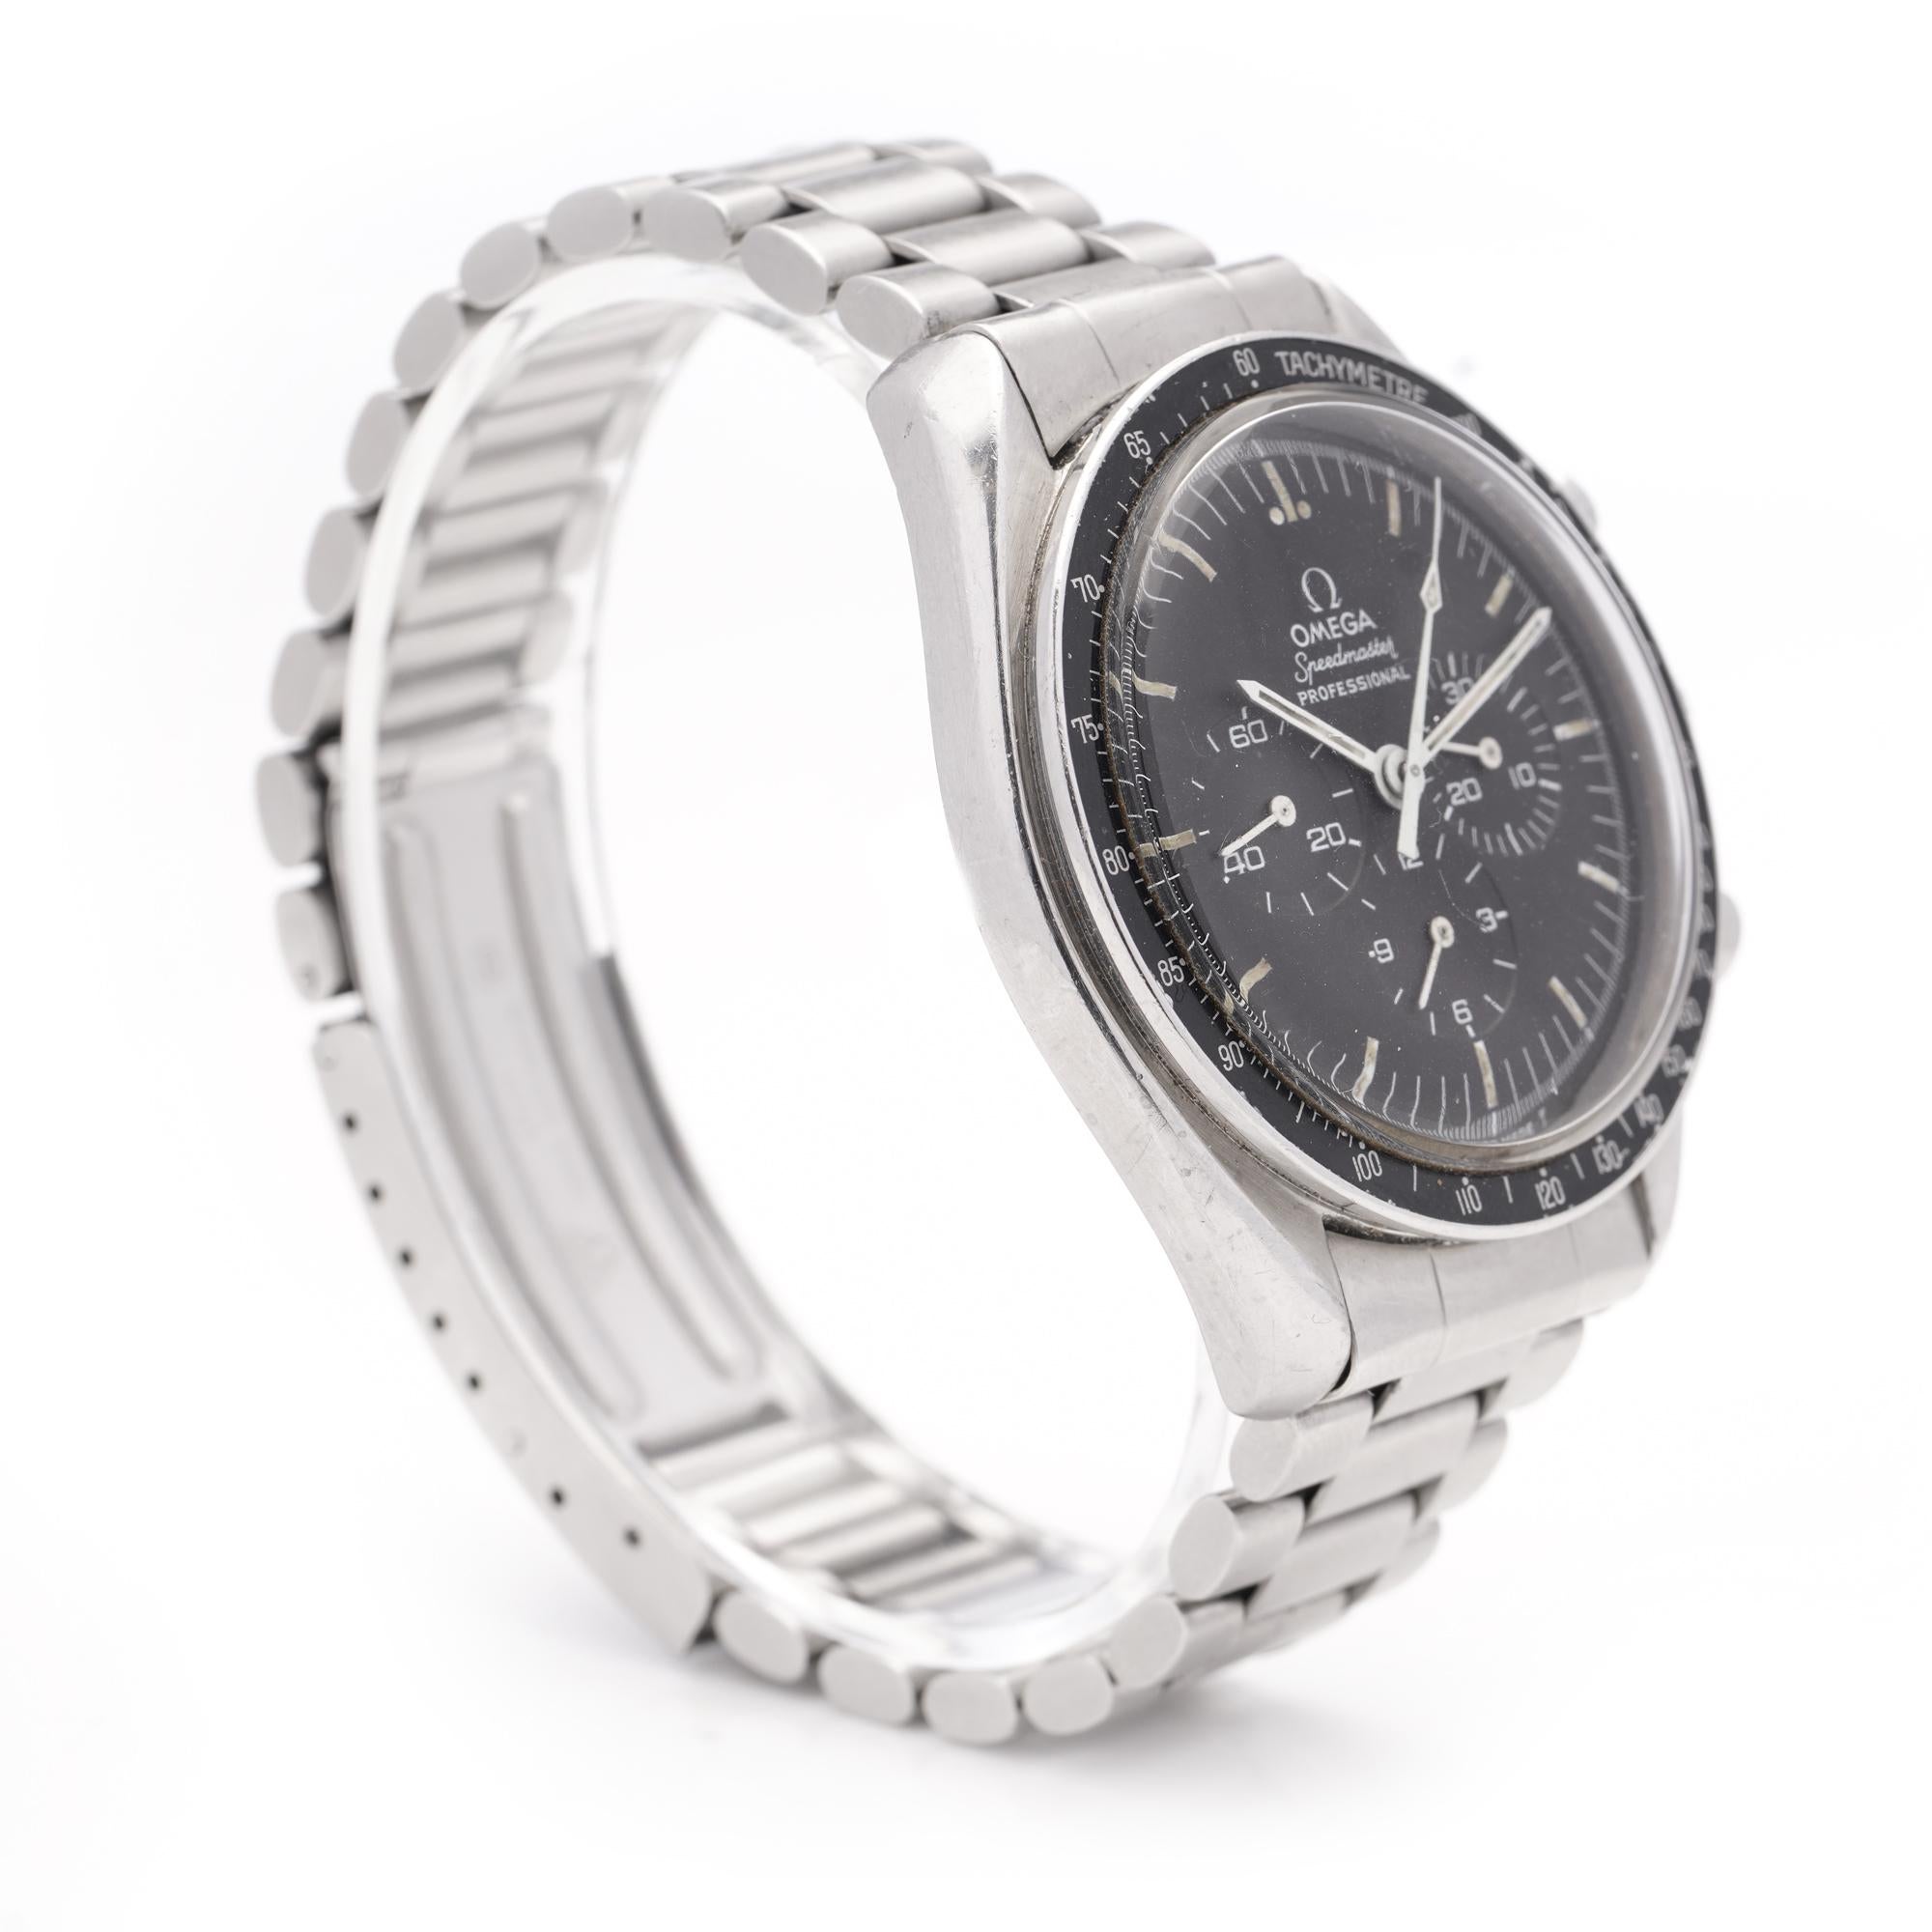 Omega Speedmaster Professional ‘Moonwatch’, 1974 In Good Condition For Sale In Braintree, GB